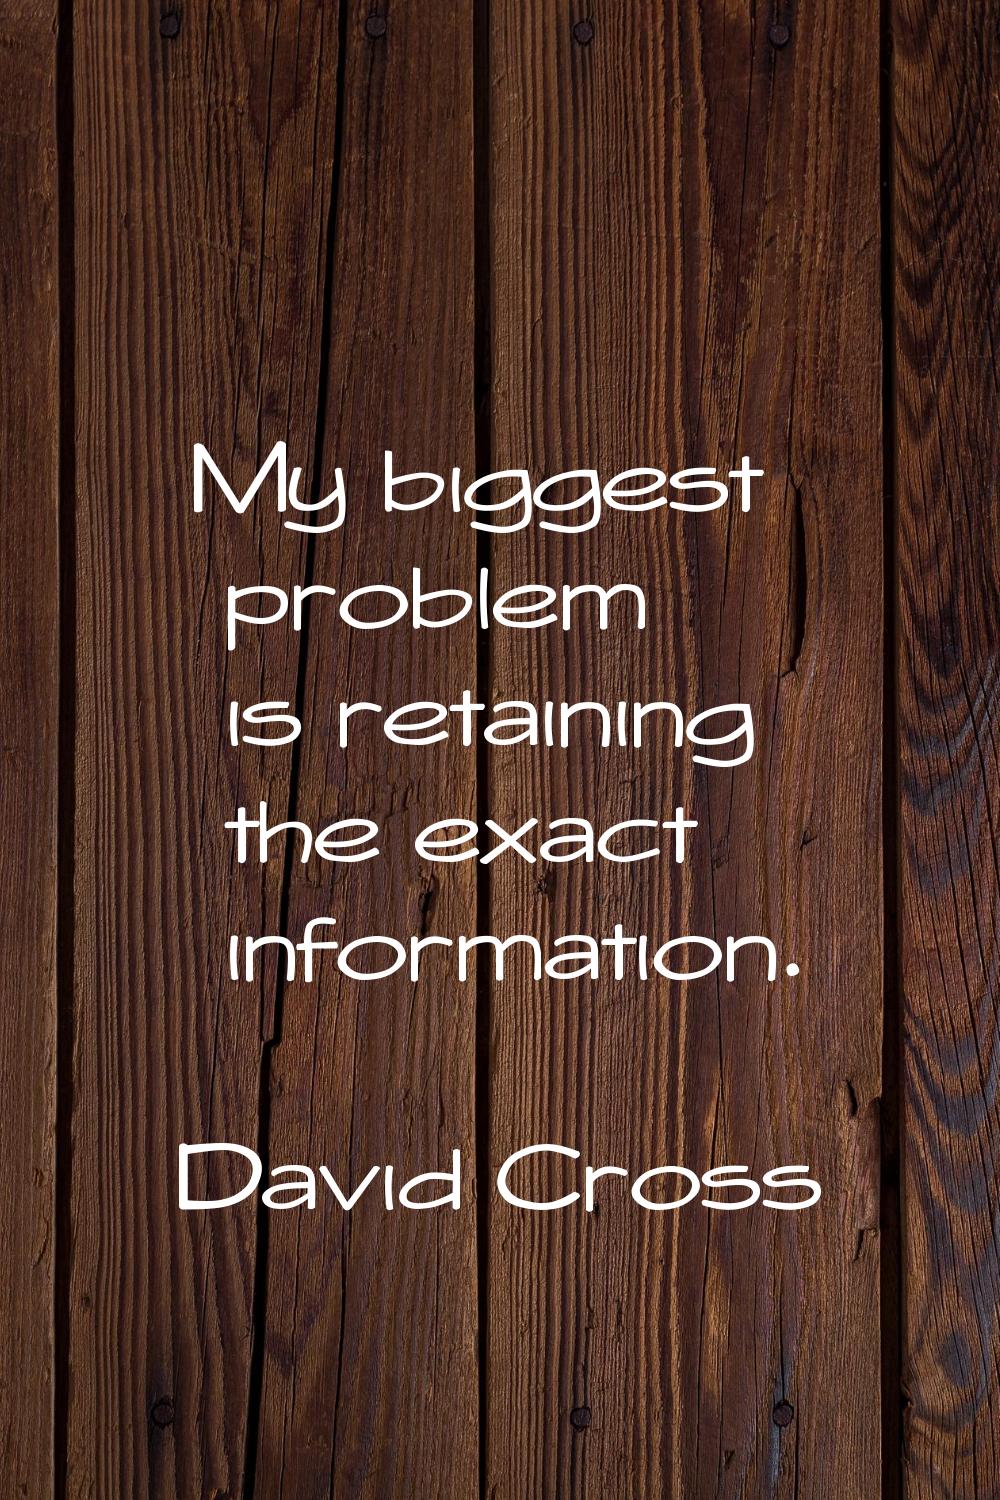 My biggest problem is retaining the exact information.